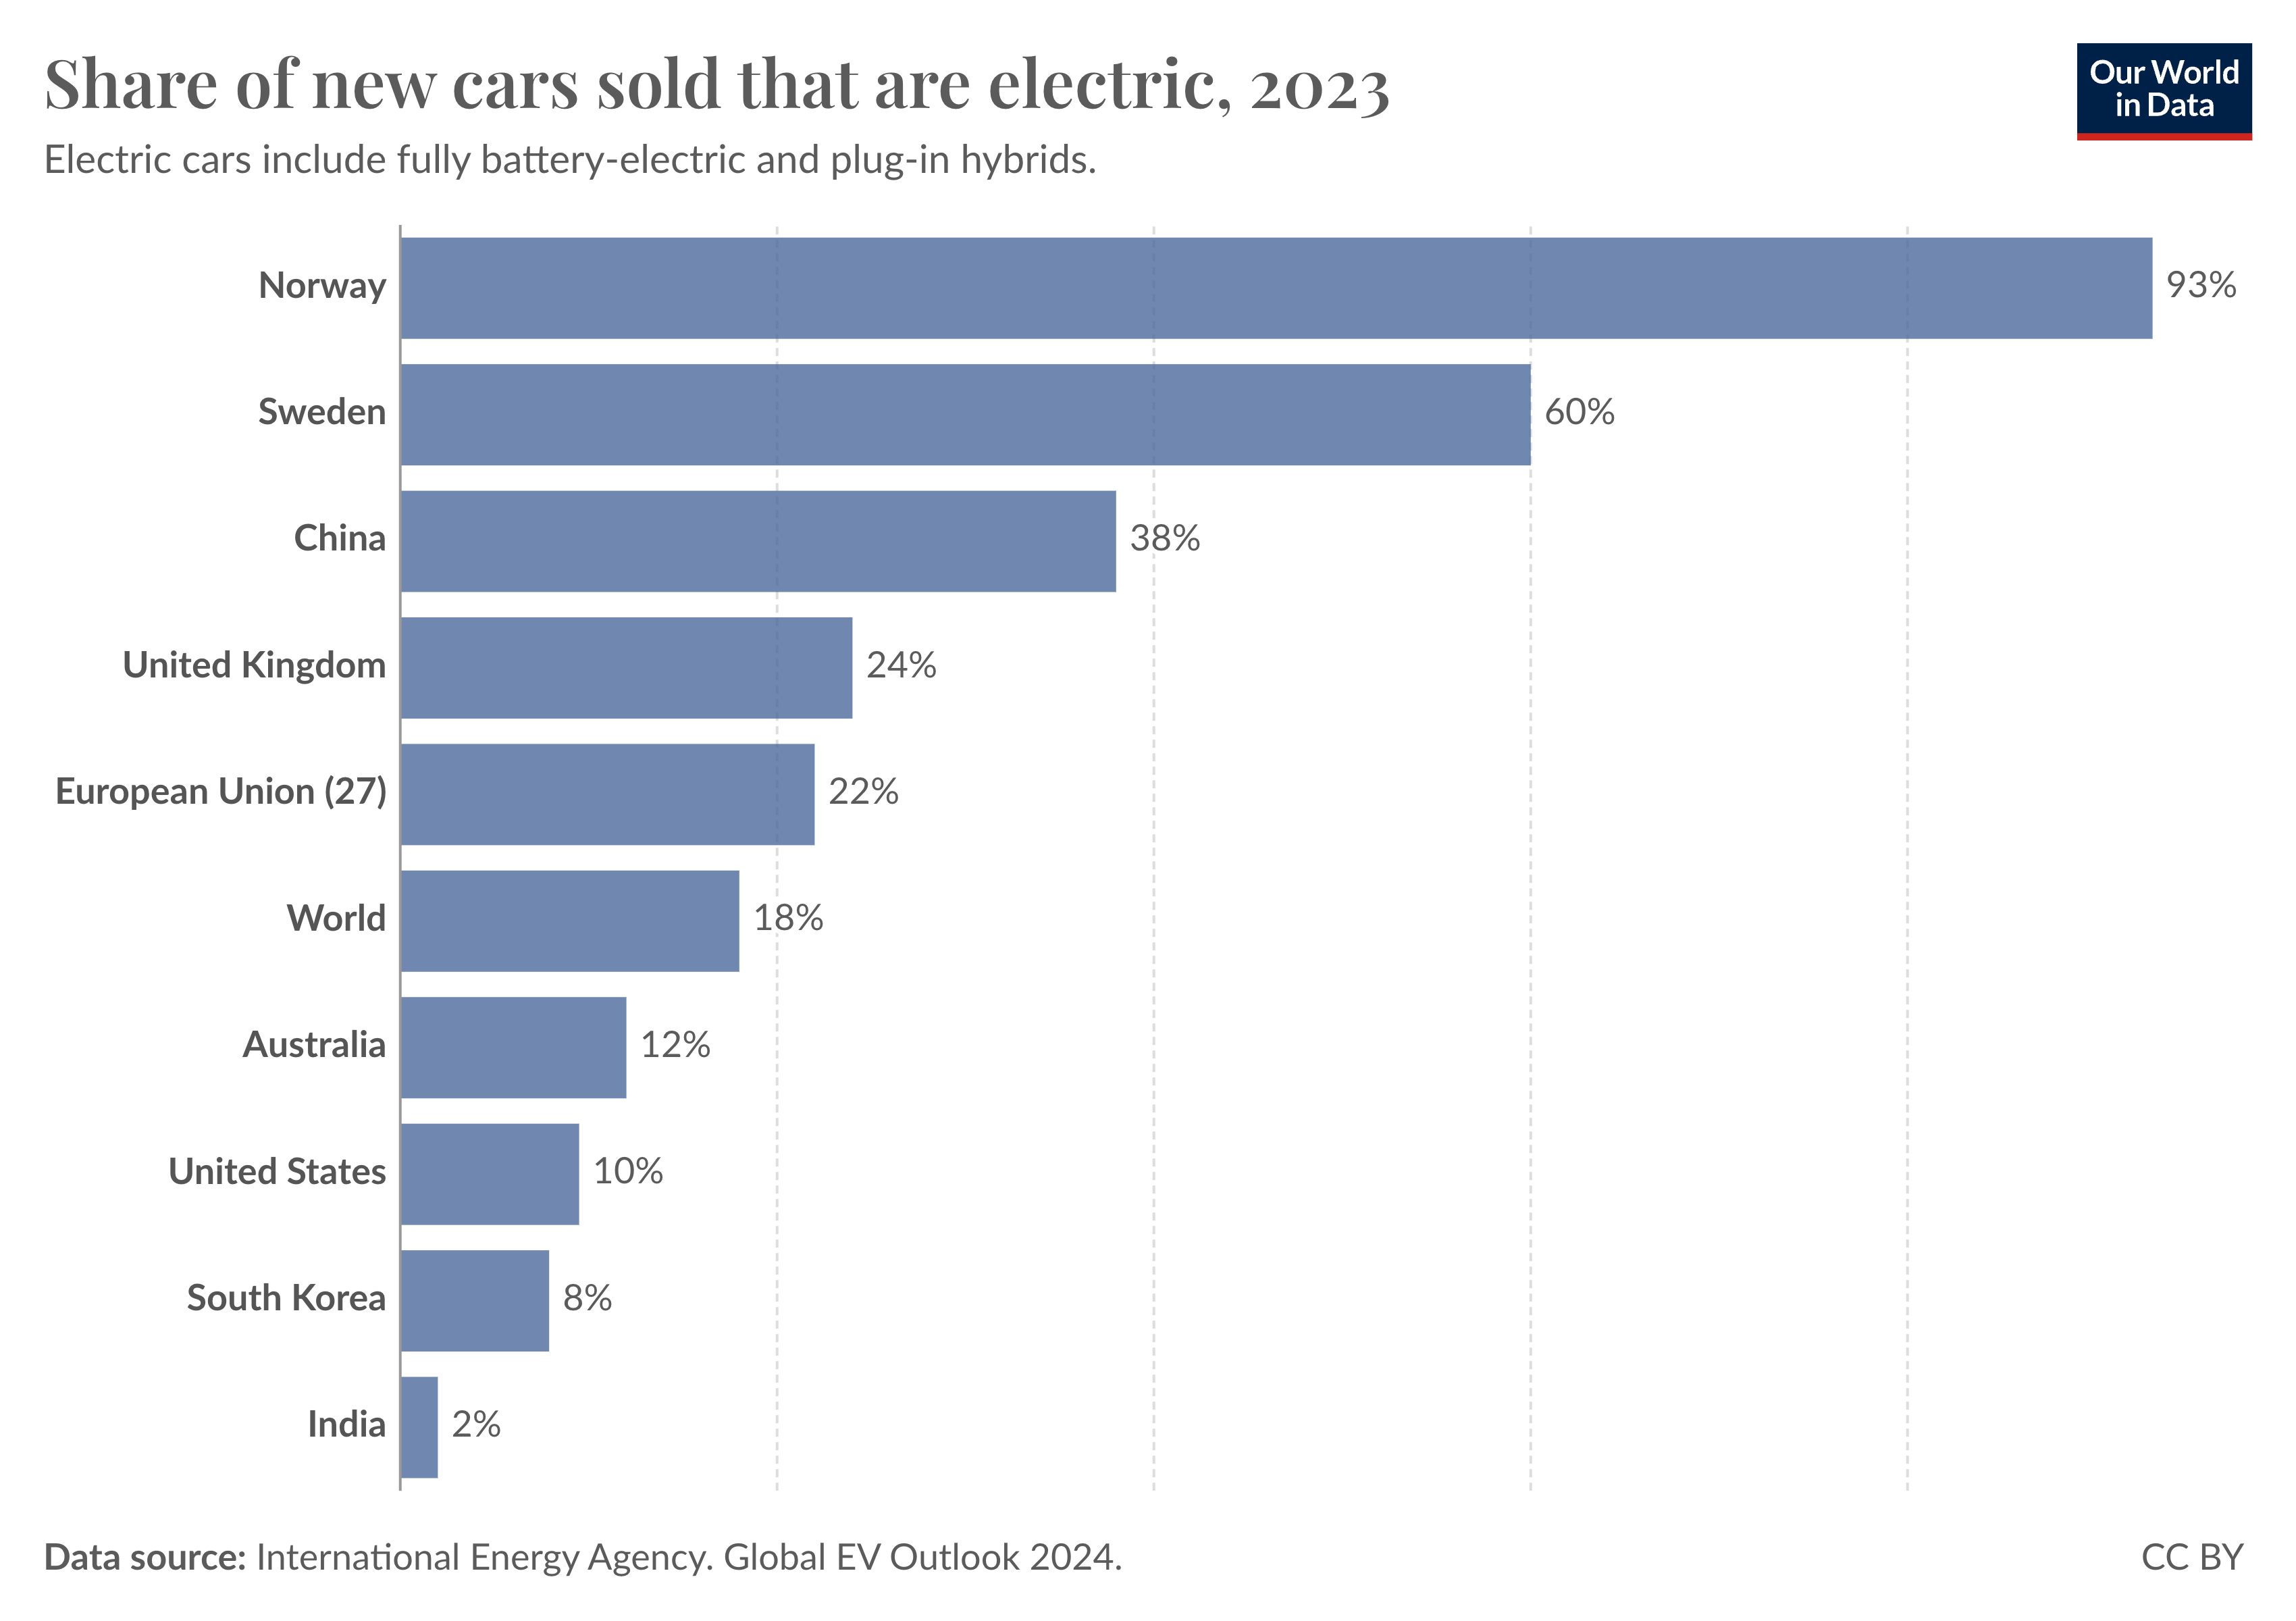 Bar chart showing the share of new cars sold in 2023 that were electric. Globally, this share was 18%.